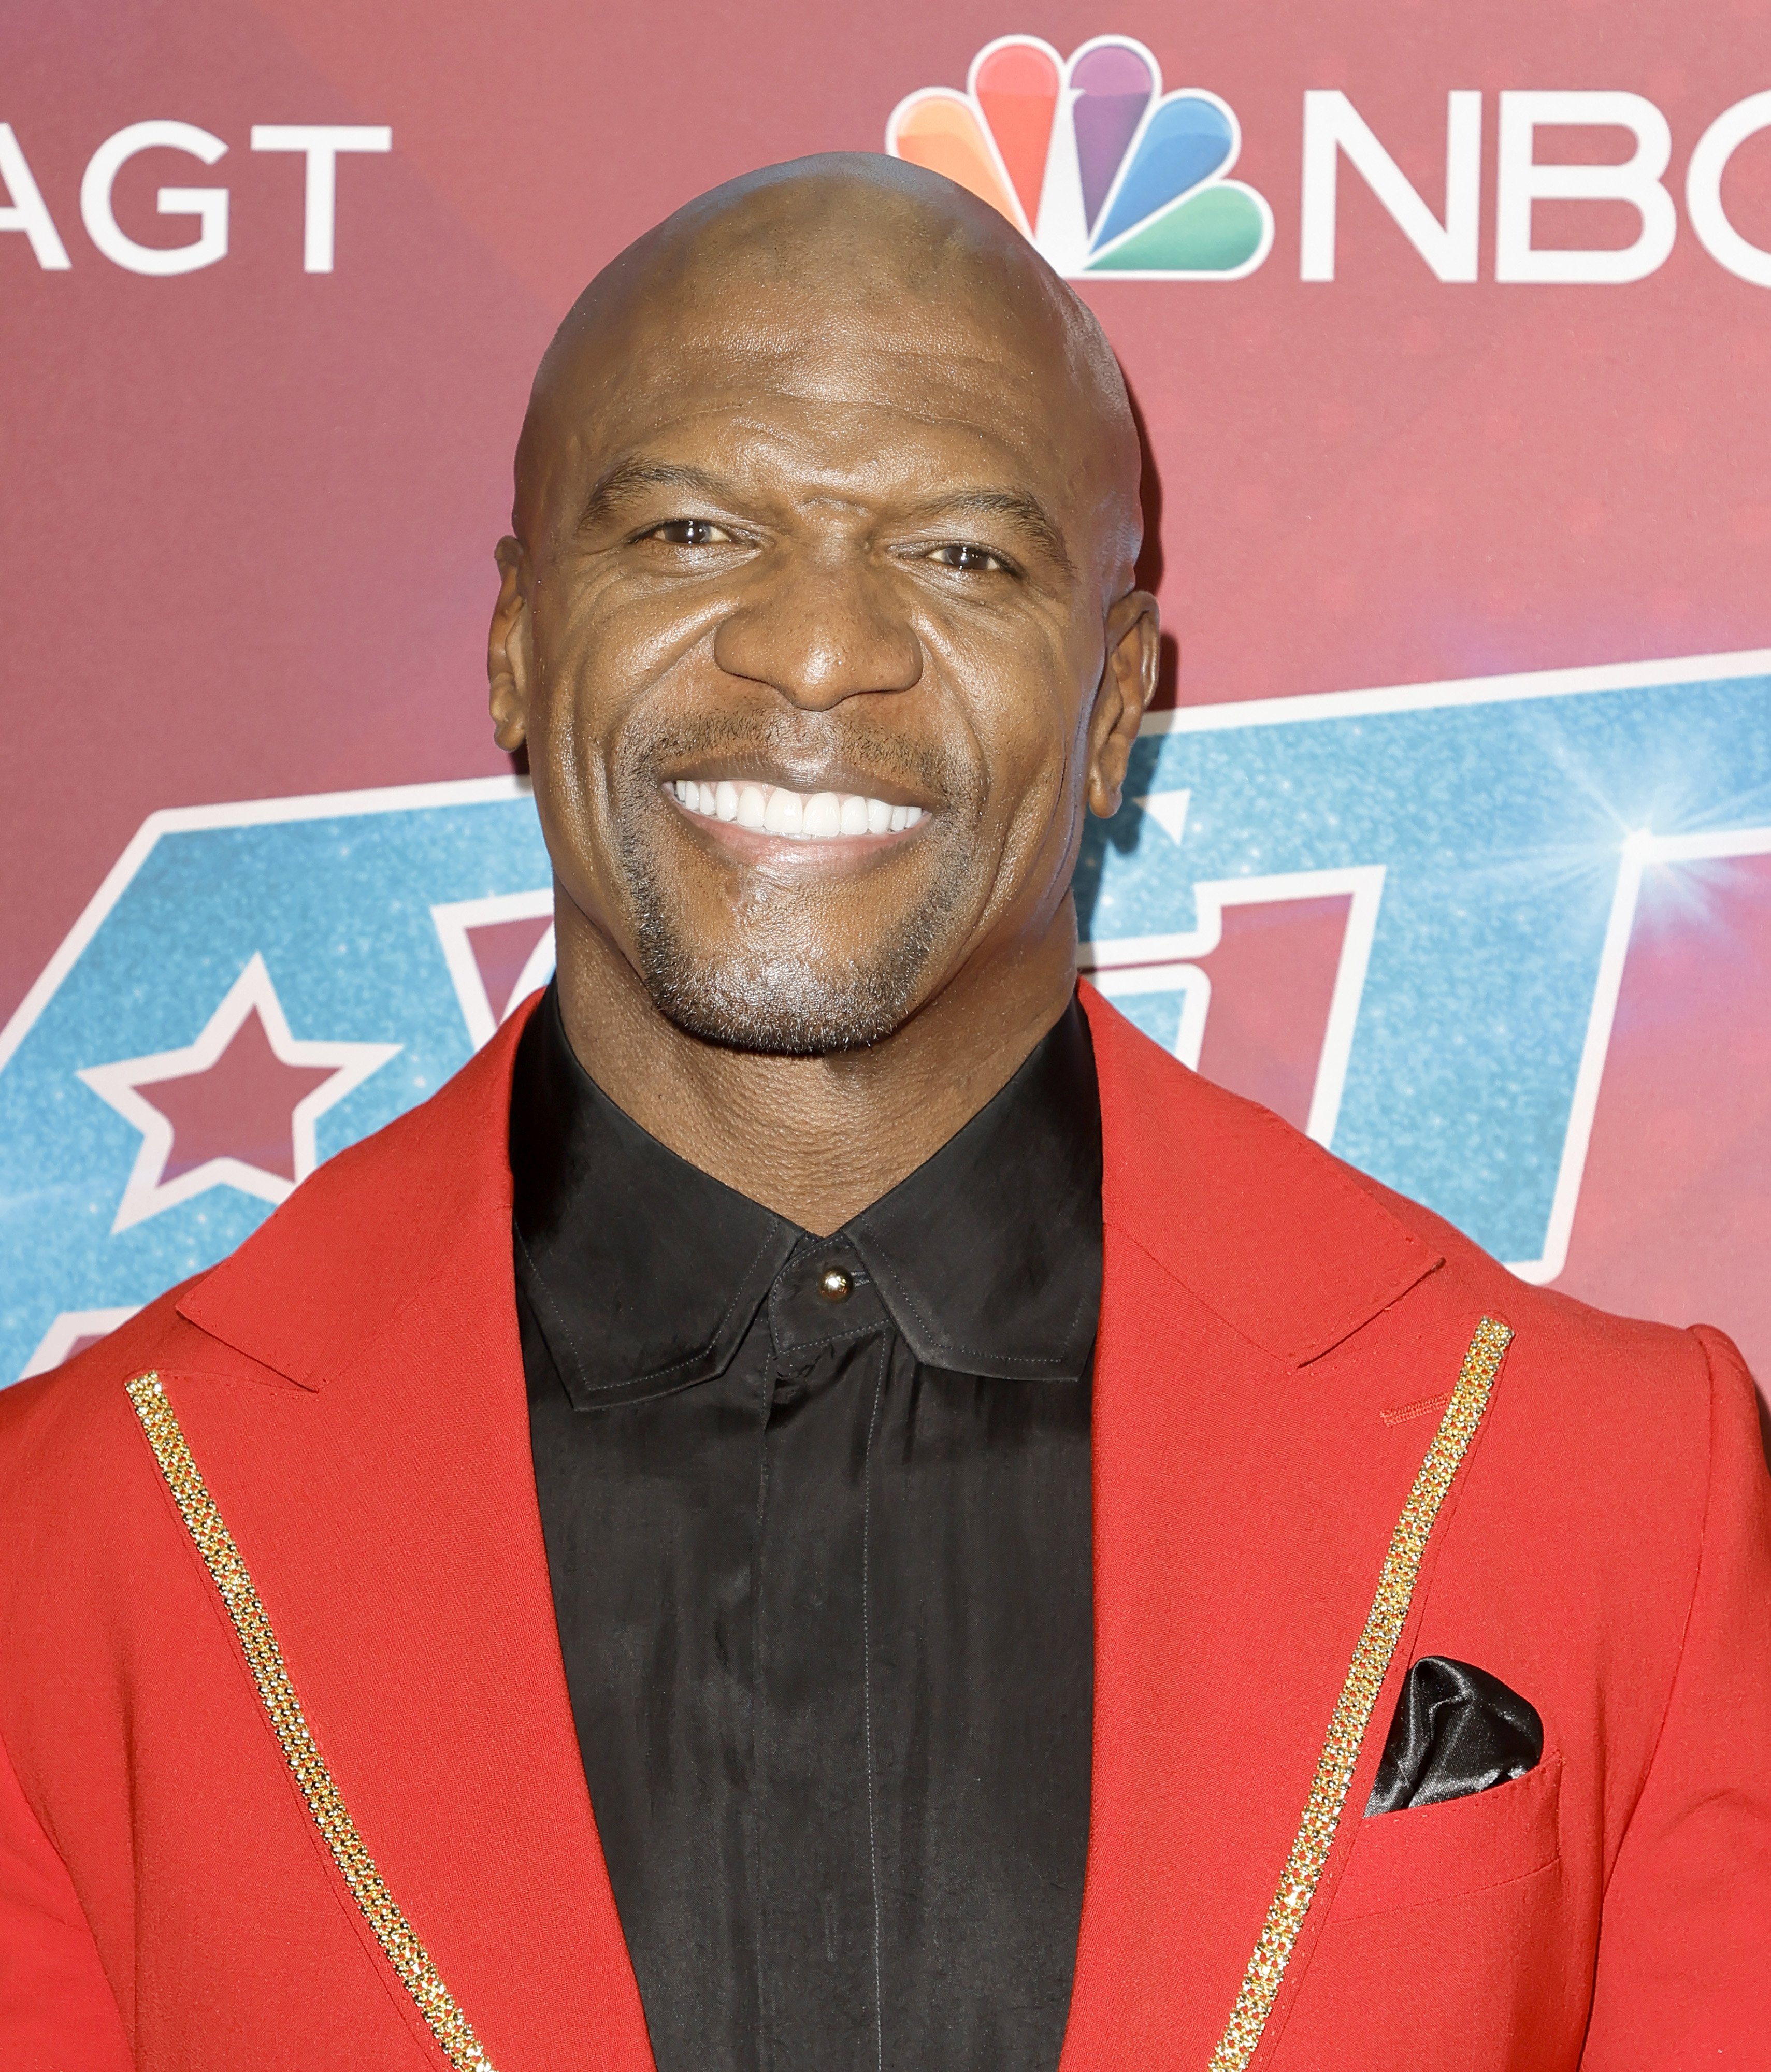 Terry Crews attends the "America's Got Talent" Season 17 Live Show Red Carpet at Sheraton Pasadena Hotel on August 30, 2022 in Pasadena, California. | Source: Getty Images